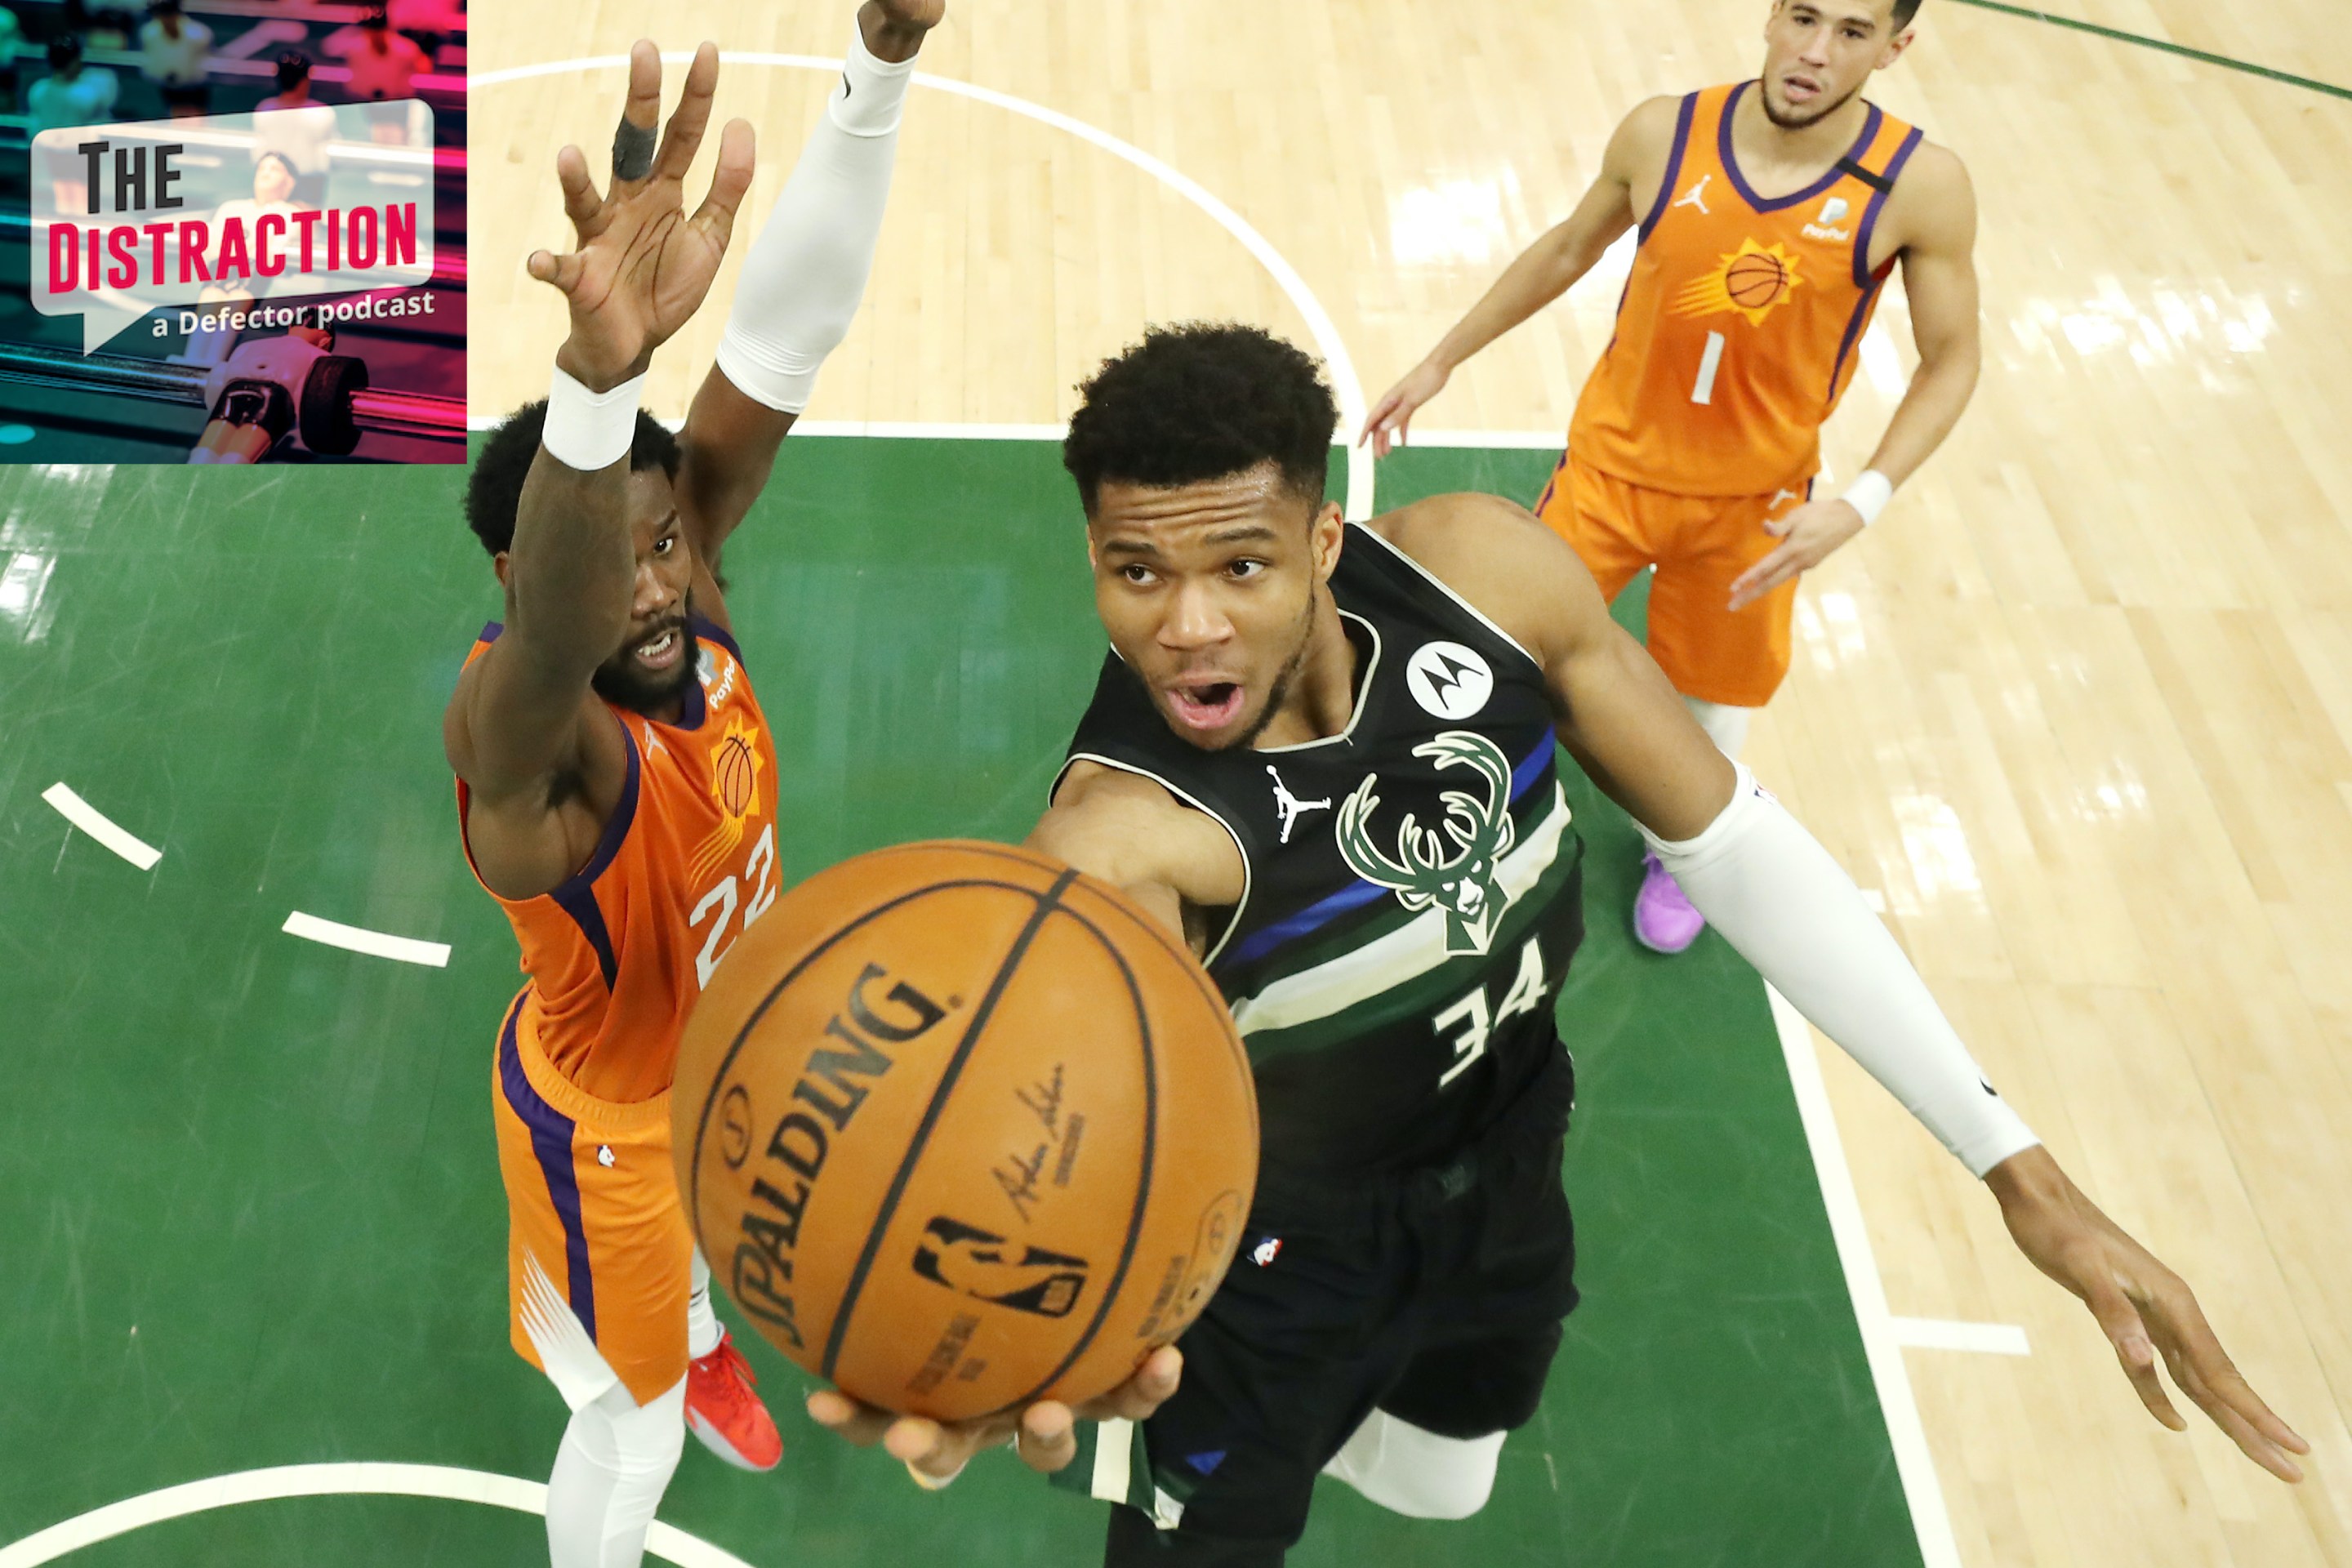 Giannis Antetokounmpo driving for one of his many baskets in the decisive Game 6 of the NBA Finals.